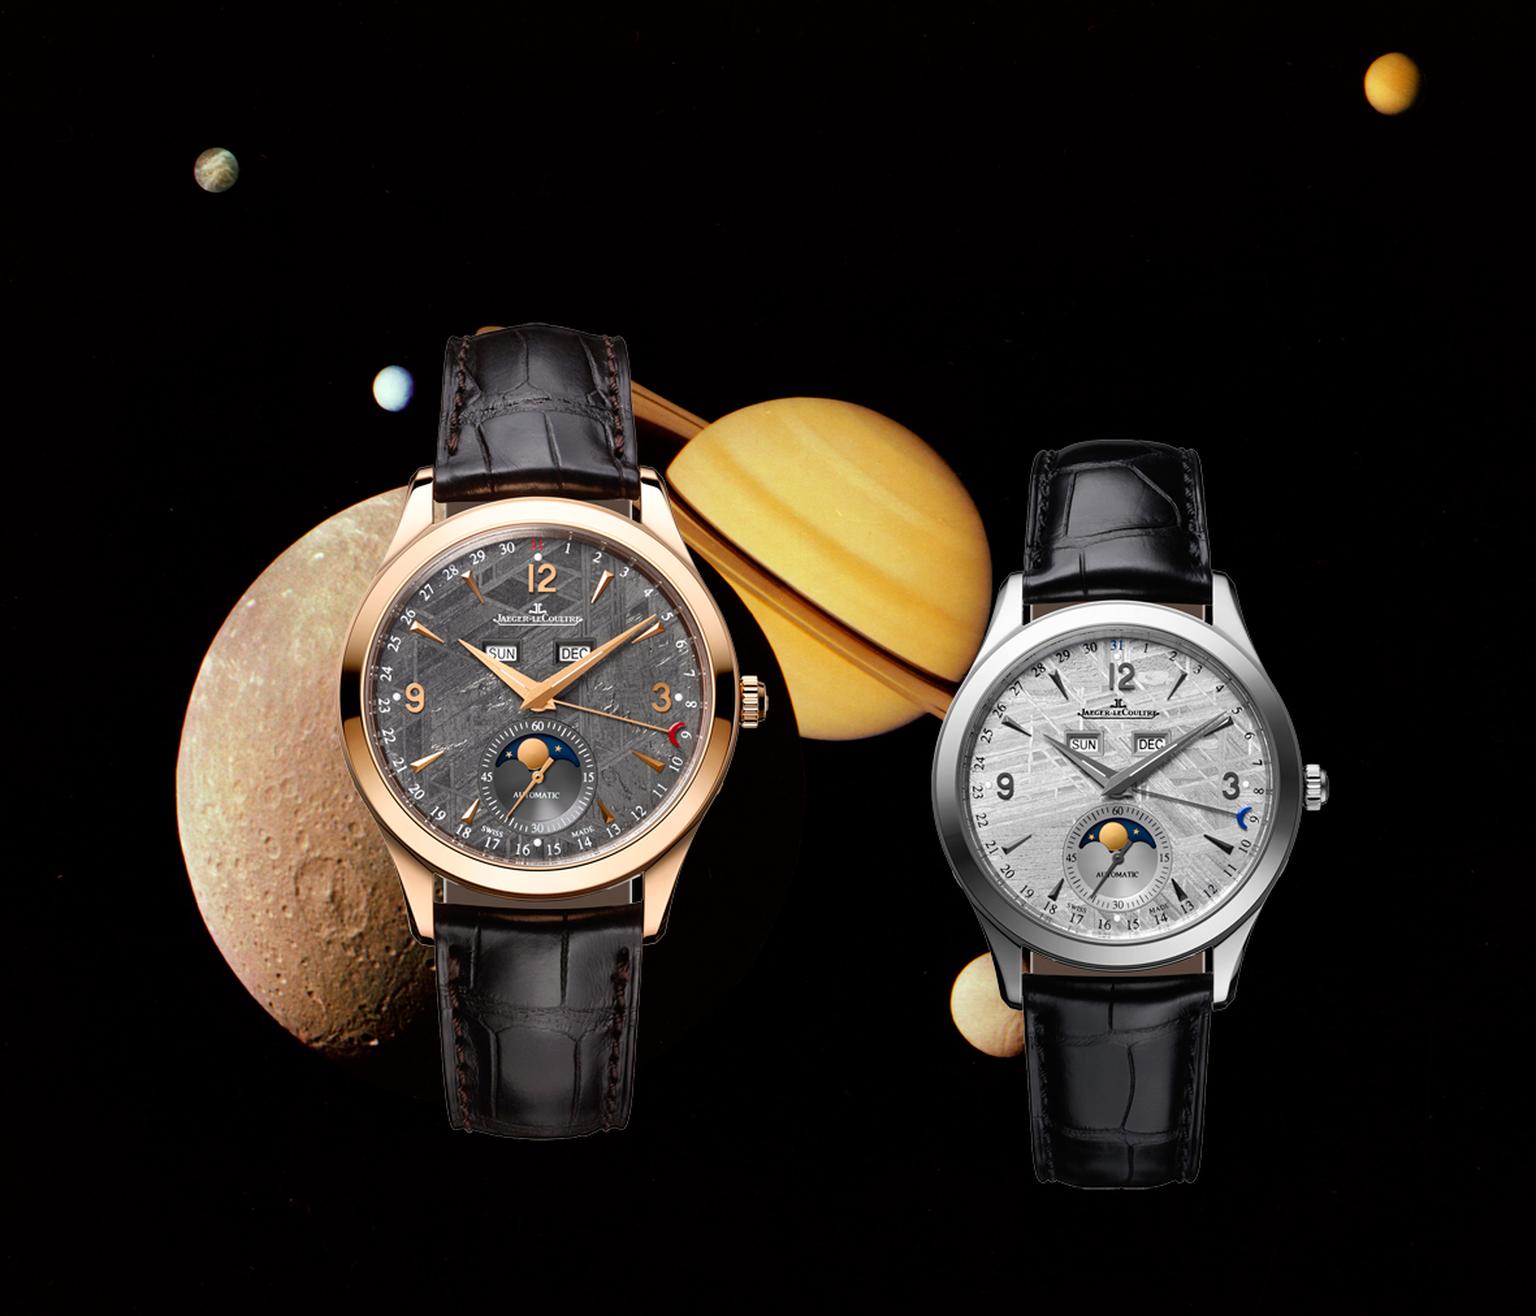 Jaeger-LeCoultre watches kicks off the watch season with a